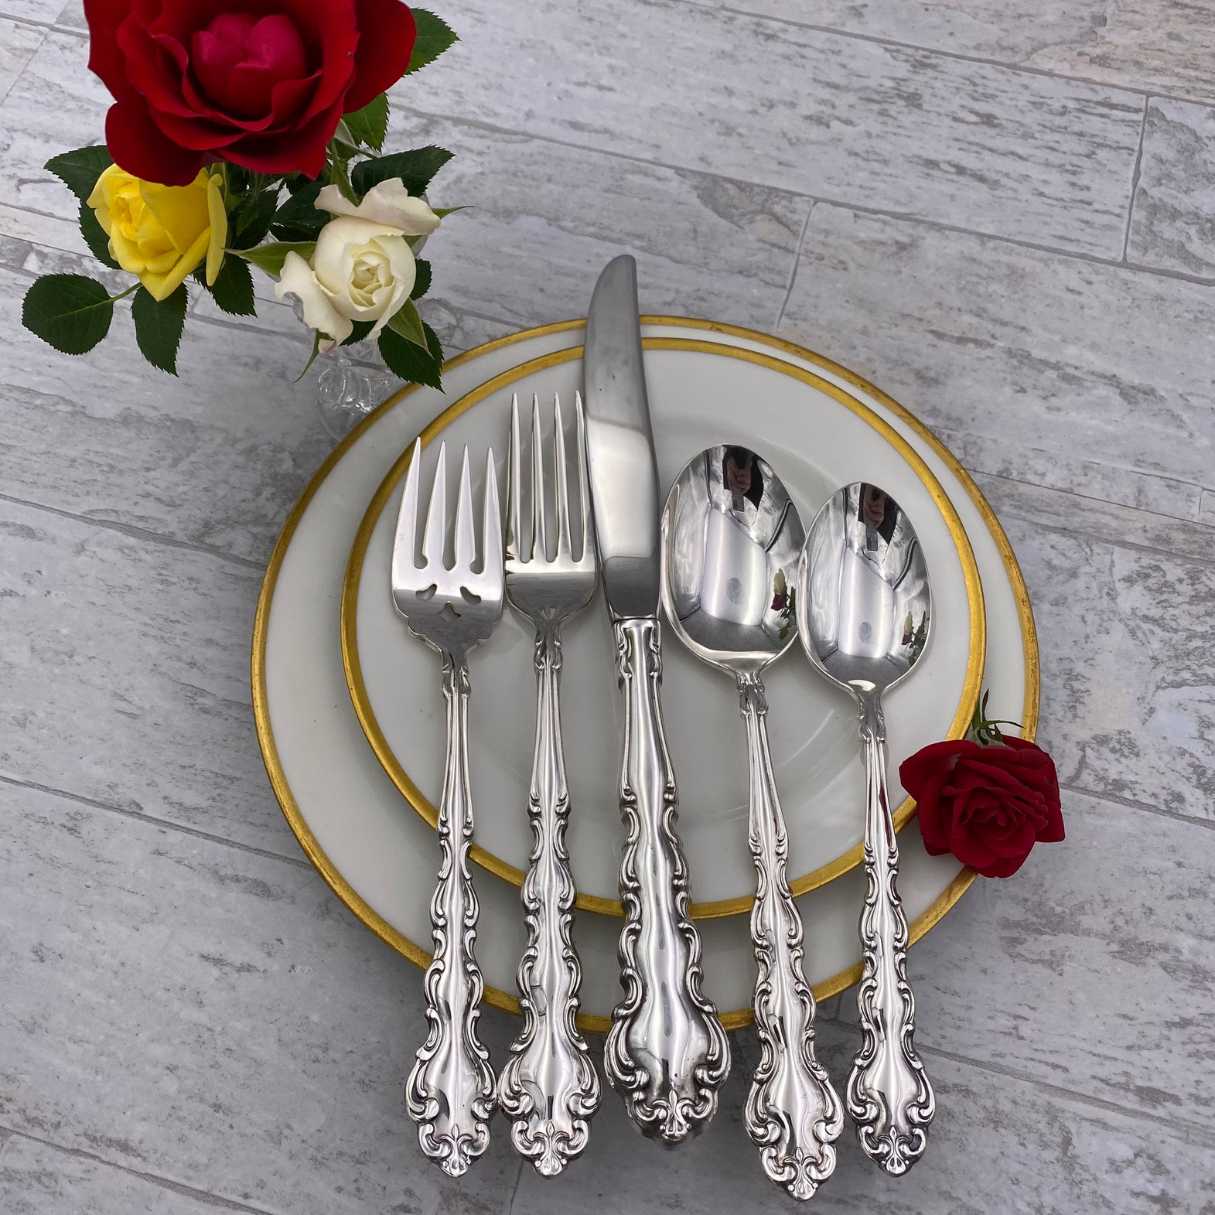 What Is The Value Of Sterling Silverware